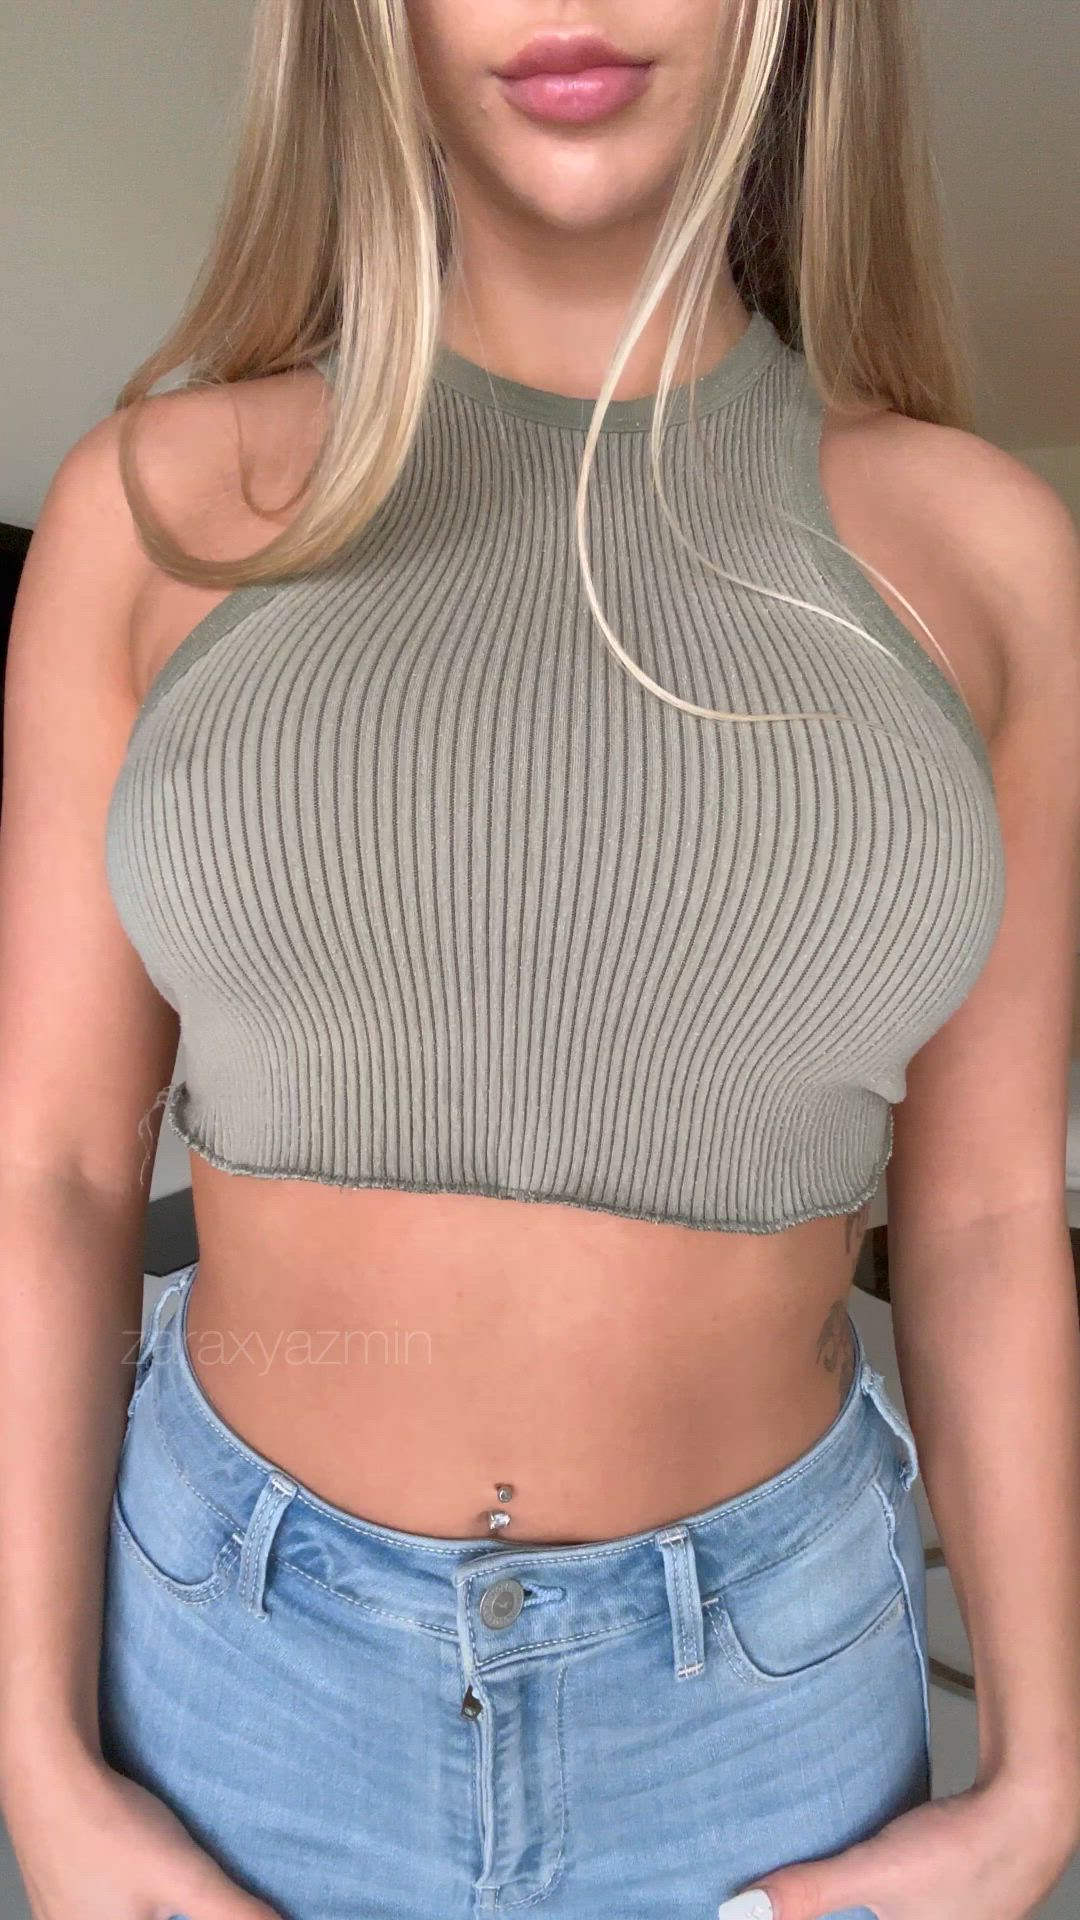 Big Tits porn video with onlyfans model Zara <strong>@zaraxyazmin</strong>